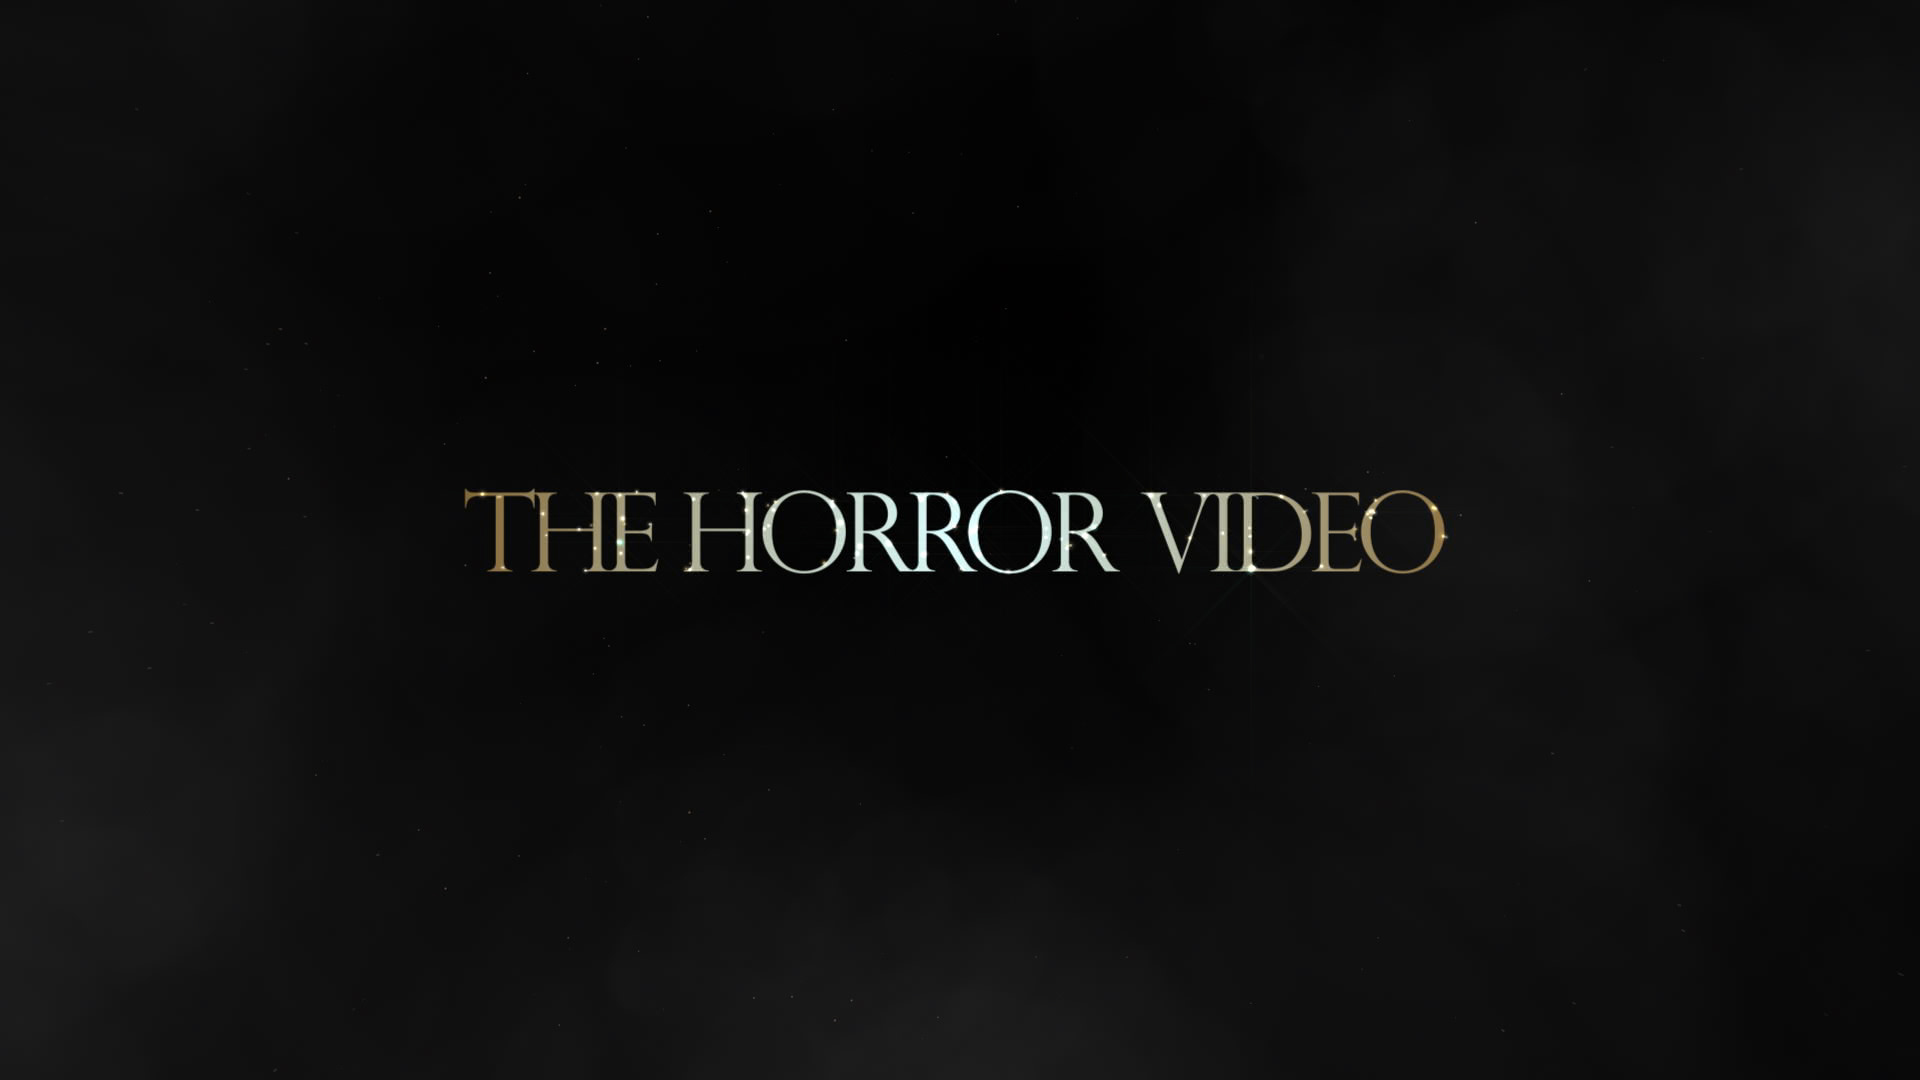 THE HORROR VIDEO ep.1